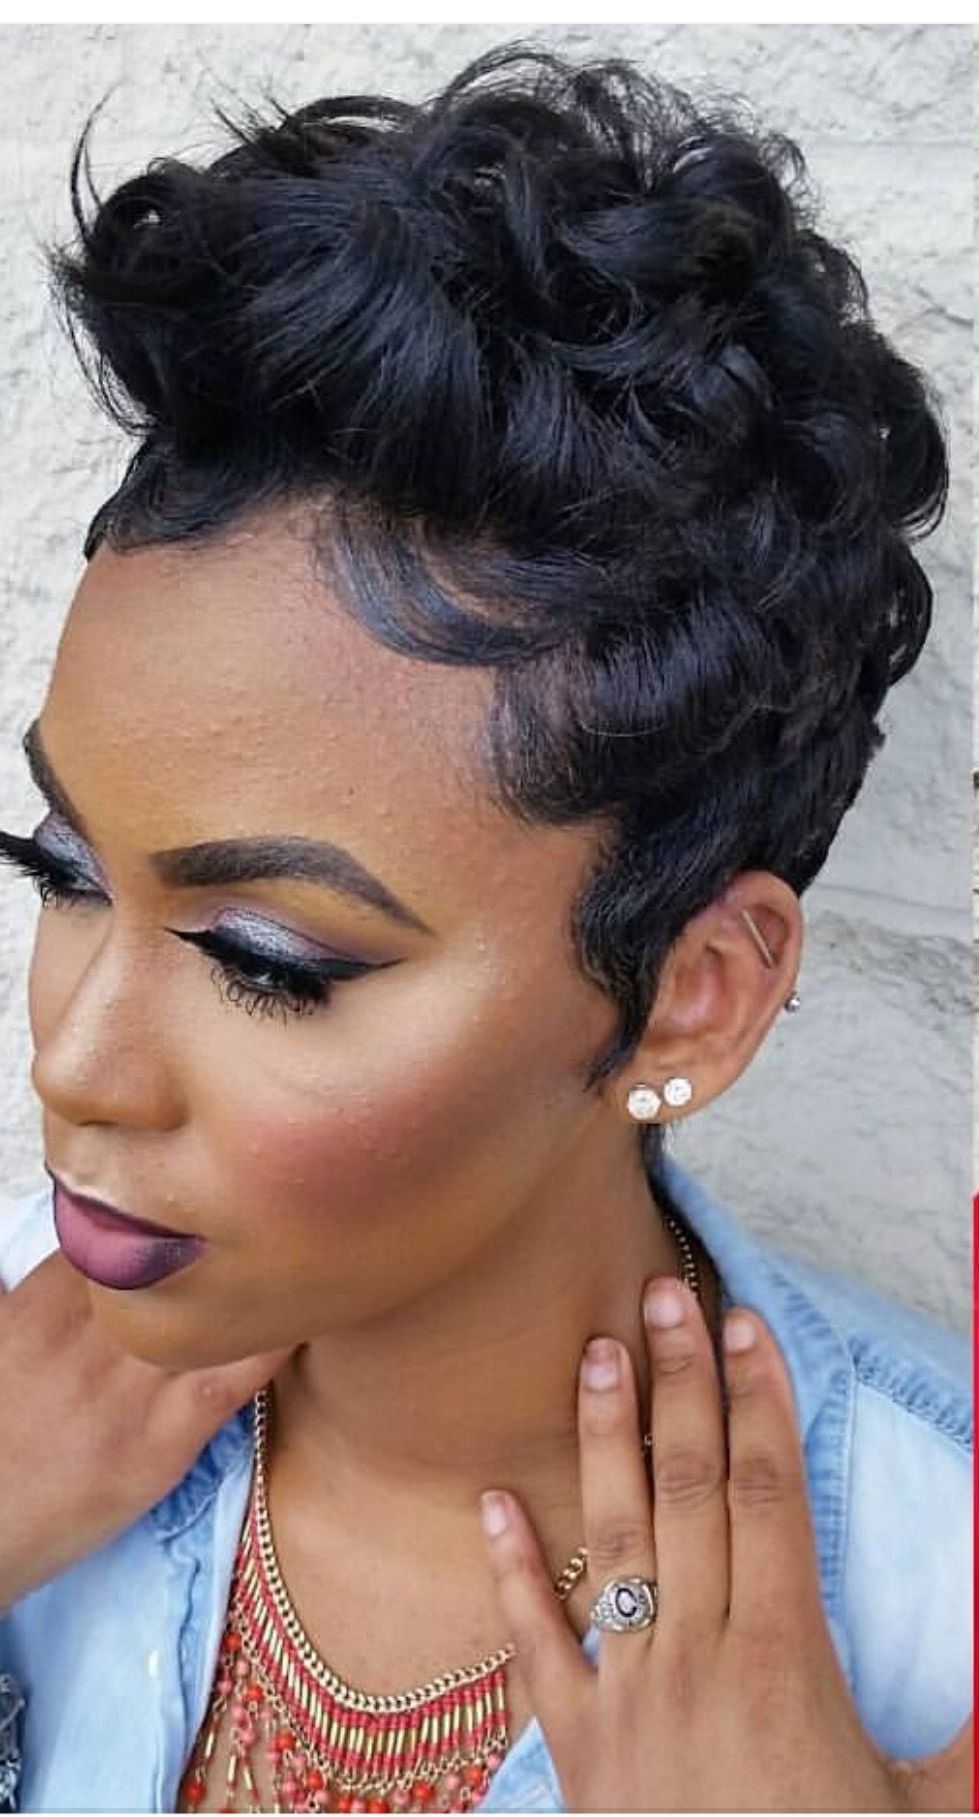 7+ Awesome African American Braided Hairstyles | Short Hair Pertaining To Cute Short Hairstyles For Black Women (View 12 of 25)